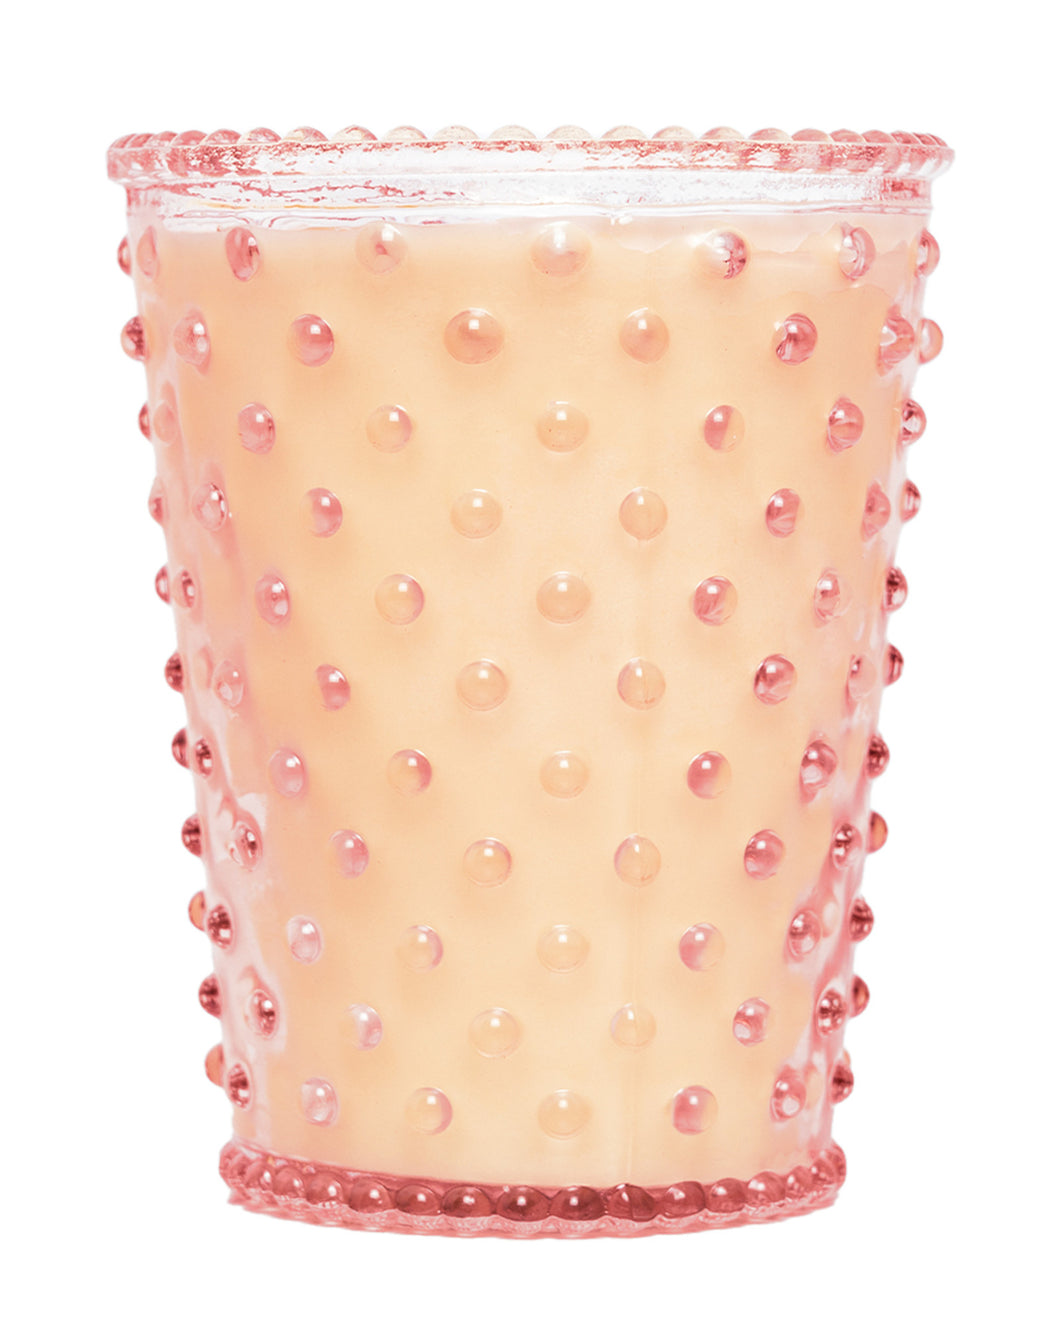 NO. 92 HONEYSUCKLE HOBNAIL GLASS CANDLE